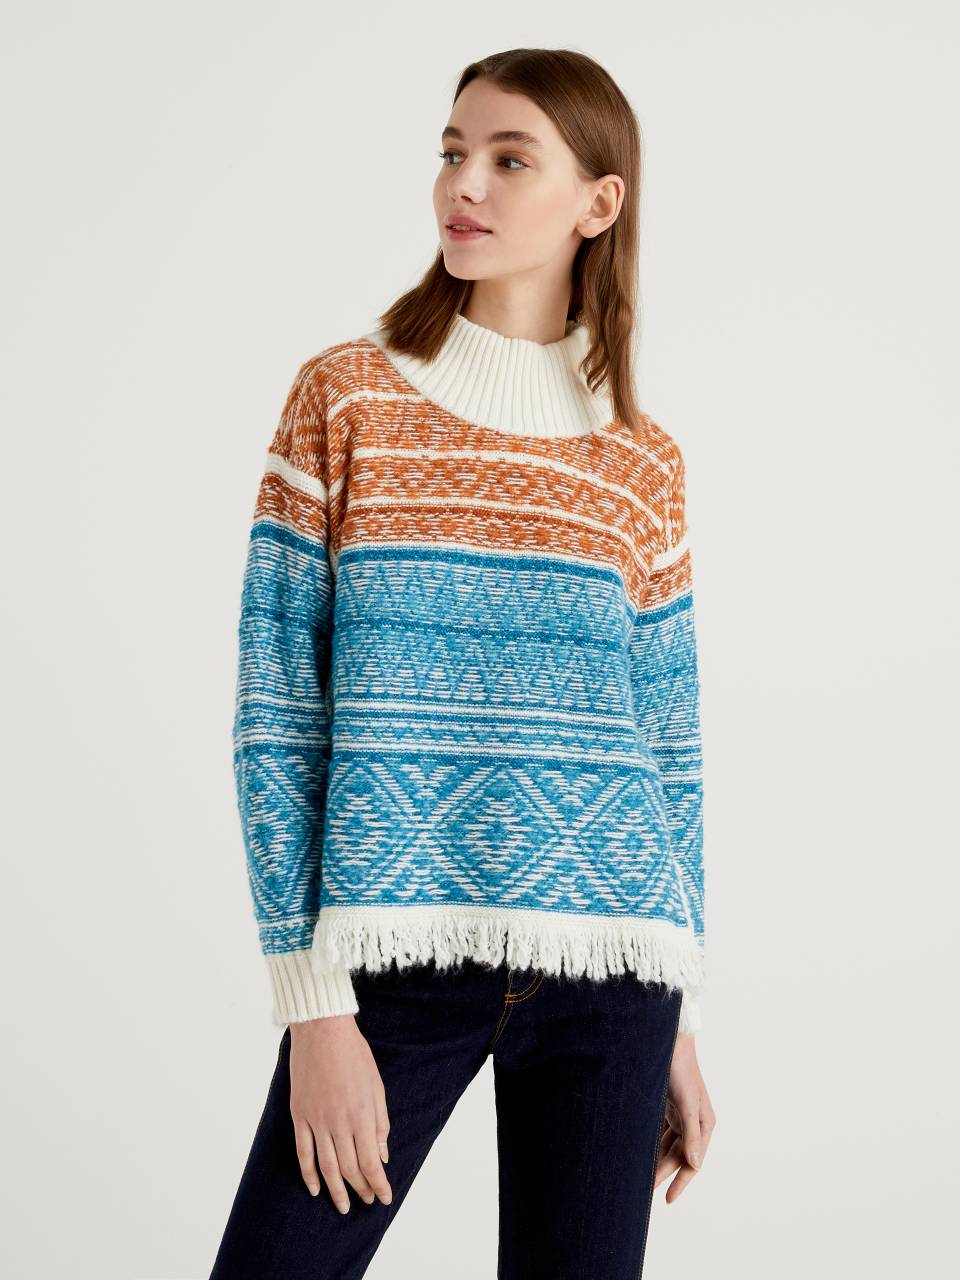 Benetton Reversible sweater with jacquard knit. 1